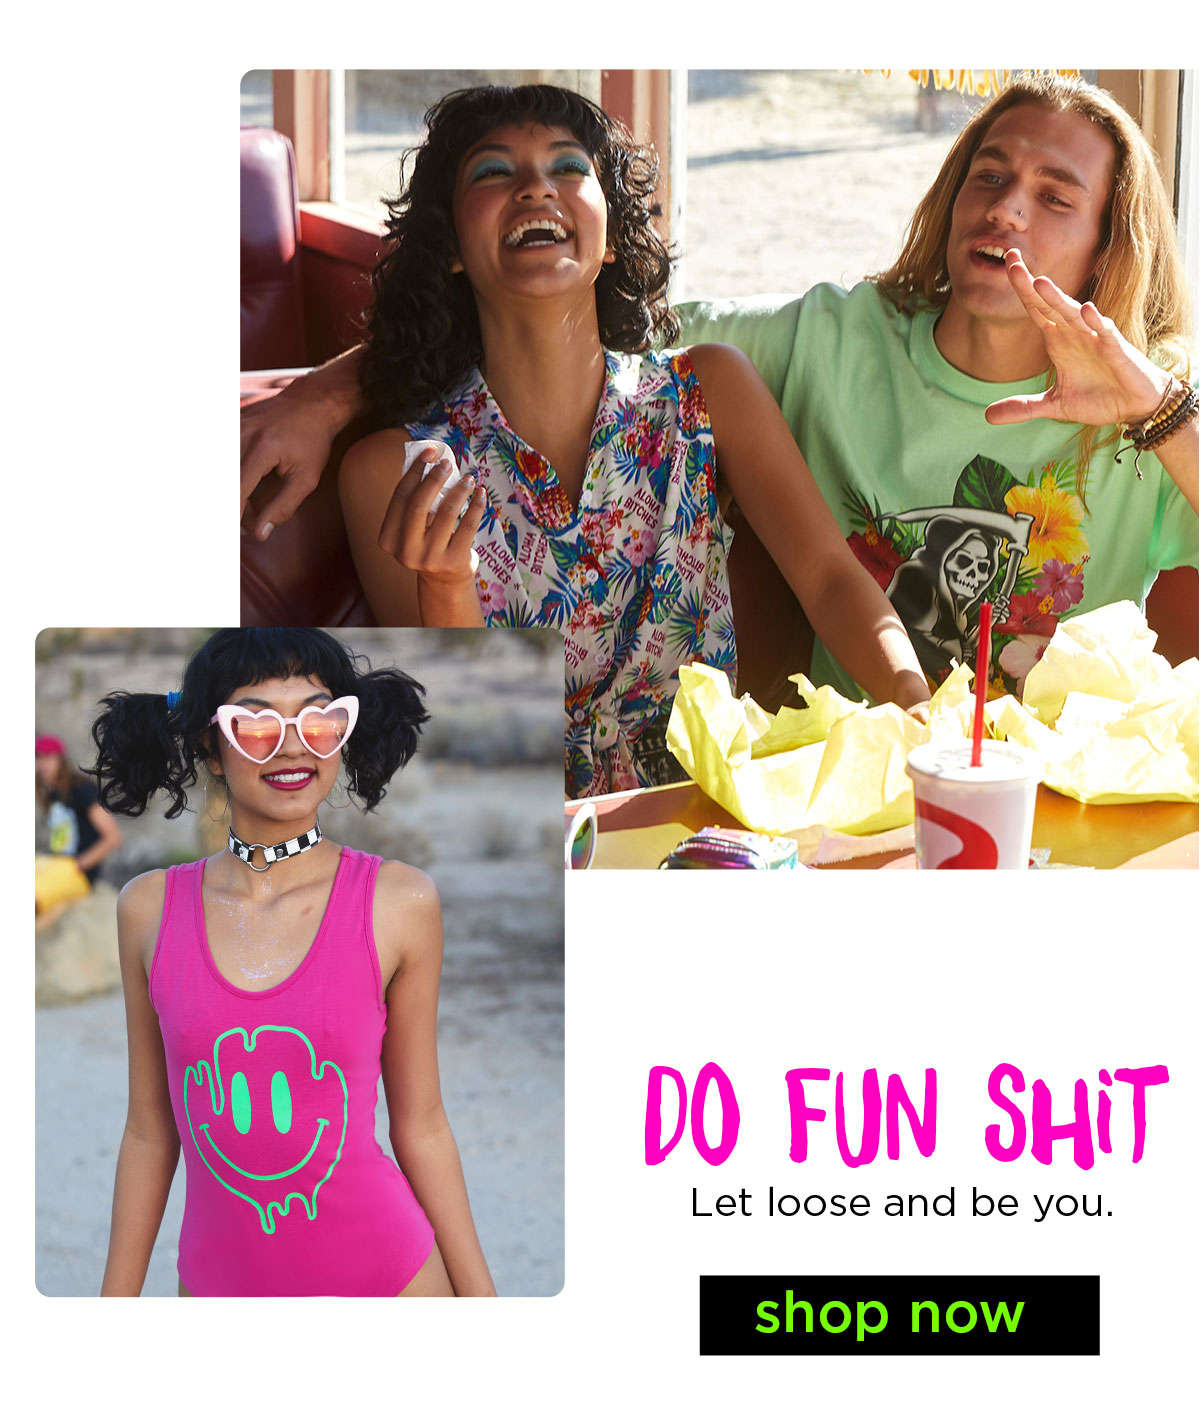 Do fun shit. Let loose and be you.